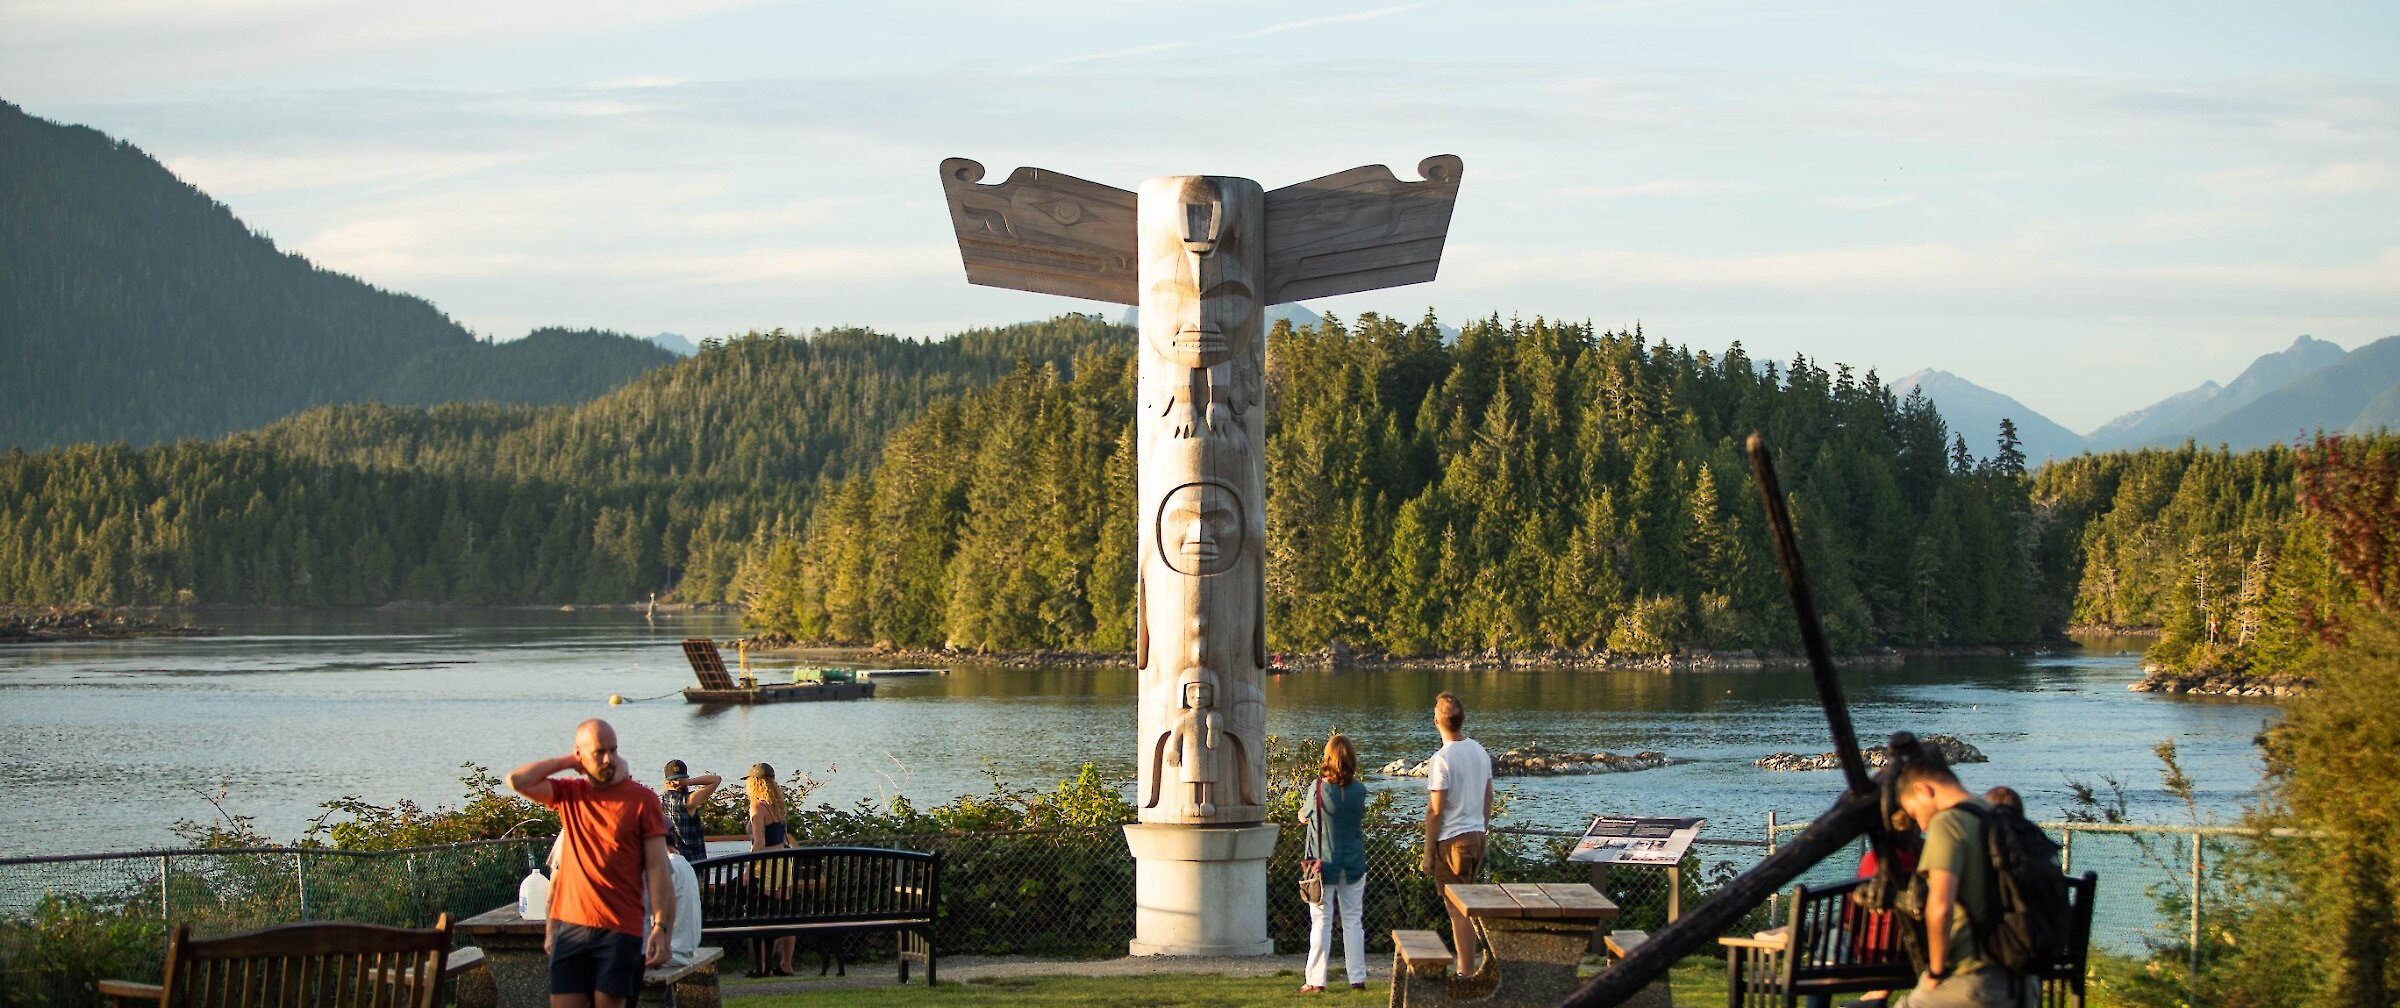 Totem pole in park with benches and picnic table, overlooking water